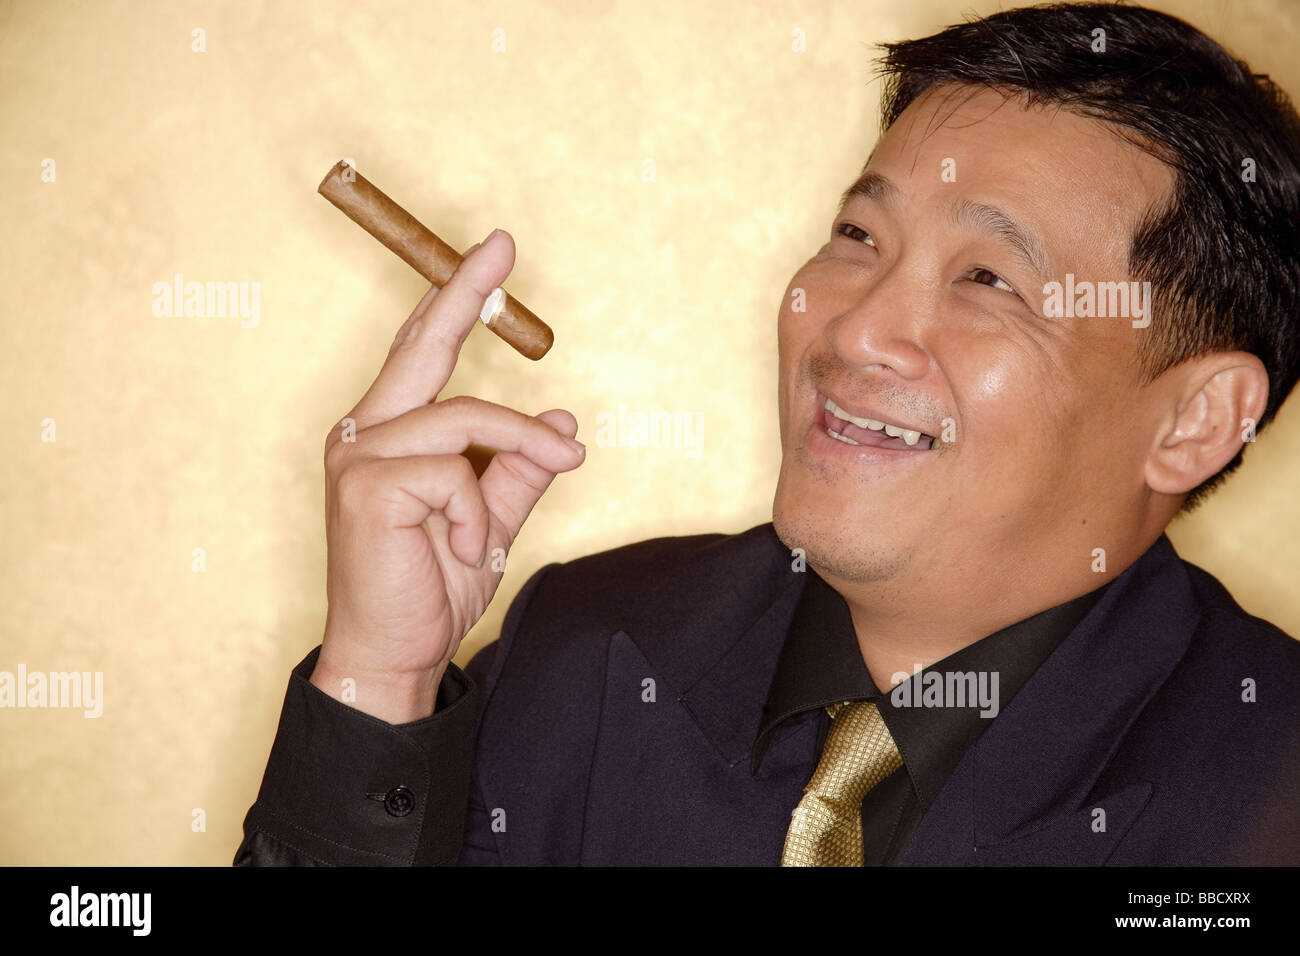 Man with cigar looking away, smiling Stock Photo